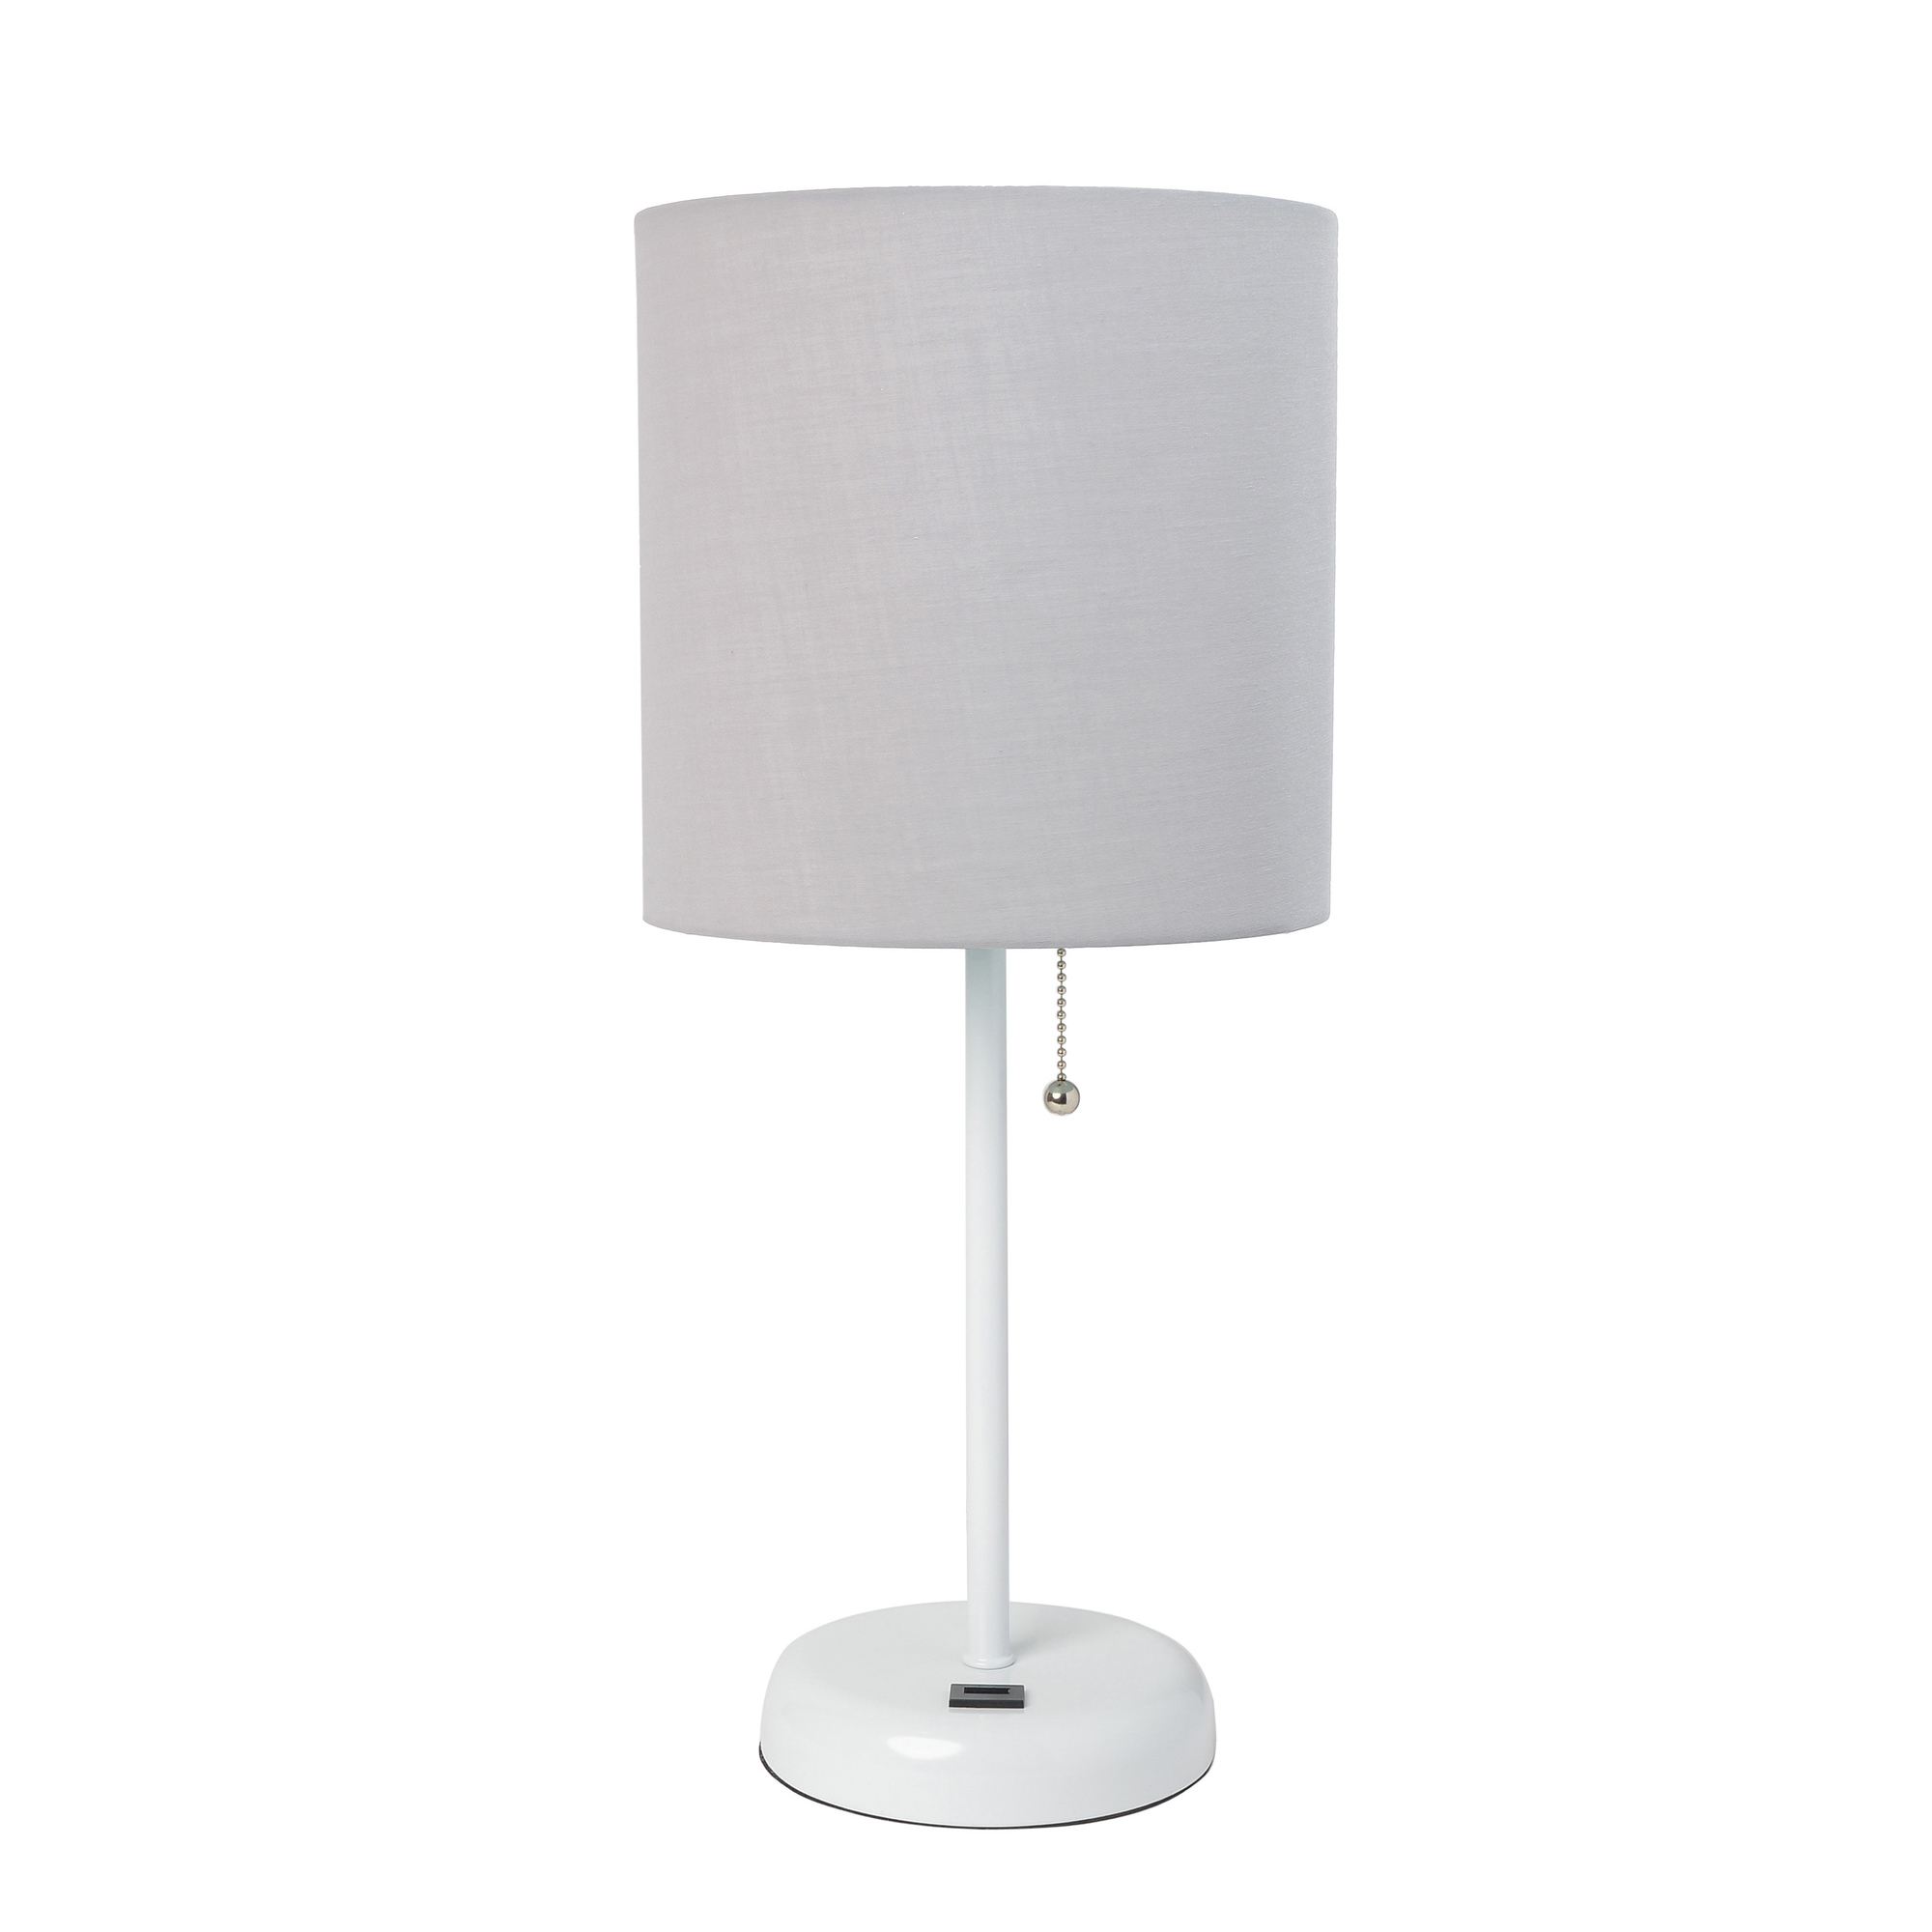 LED Floor Lamp with USB and Tablet Stand